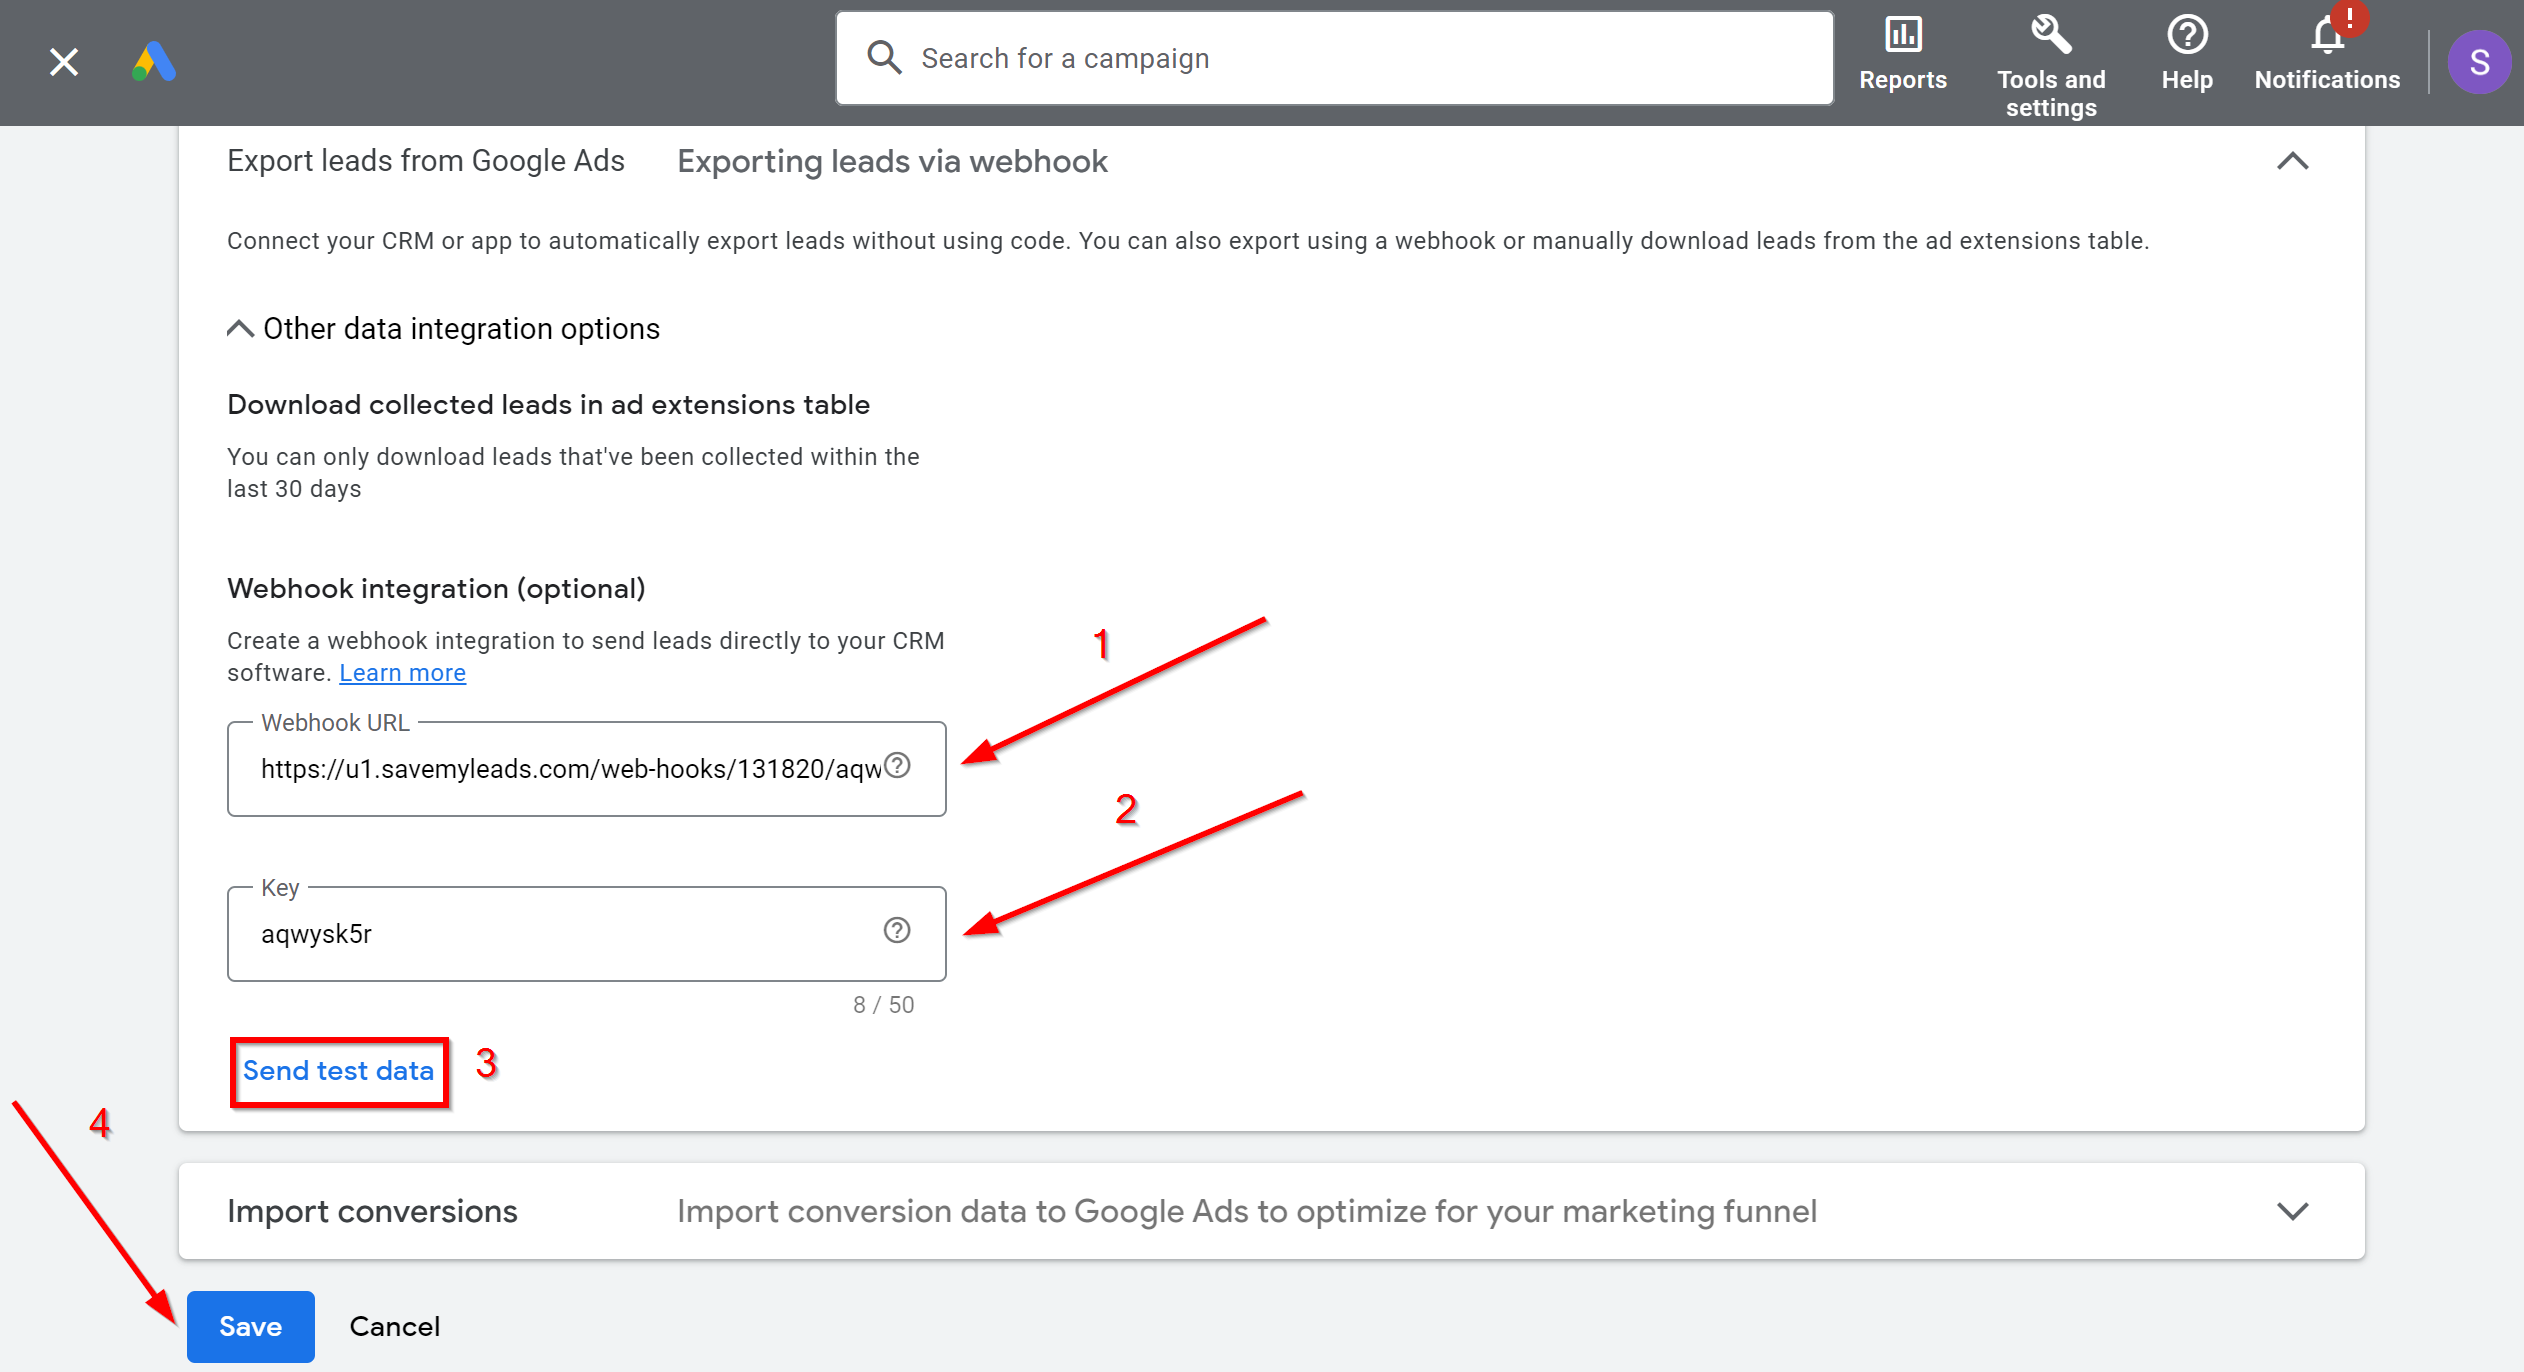 How to Connect Google Lead Form with SMS.to | Data Source account connection